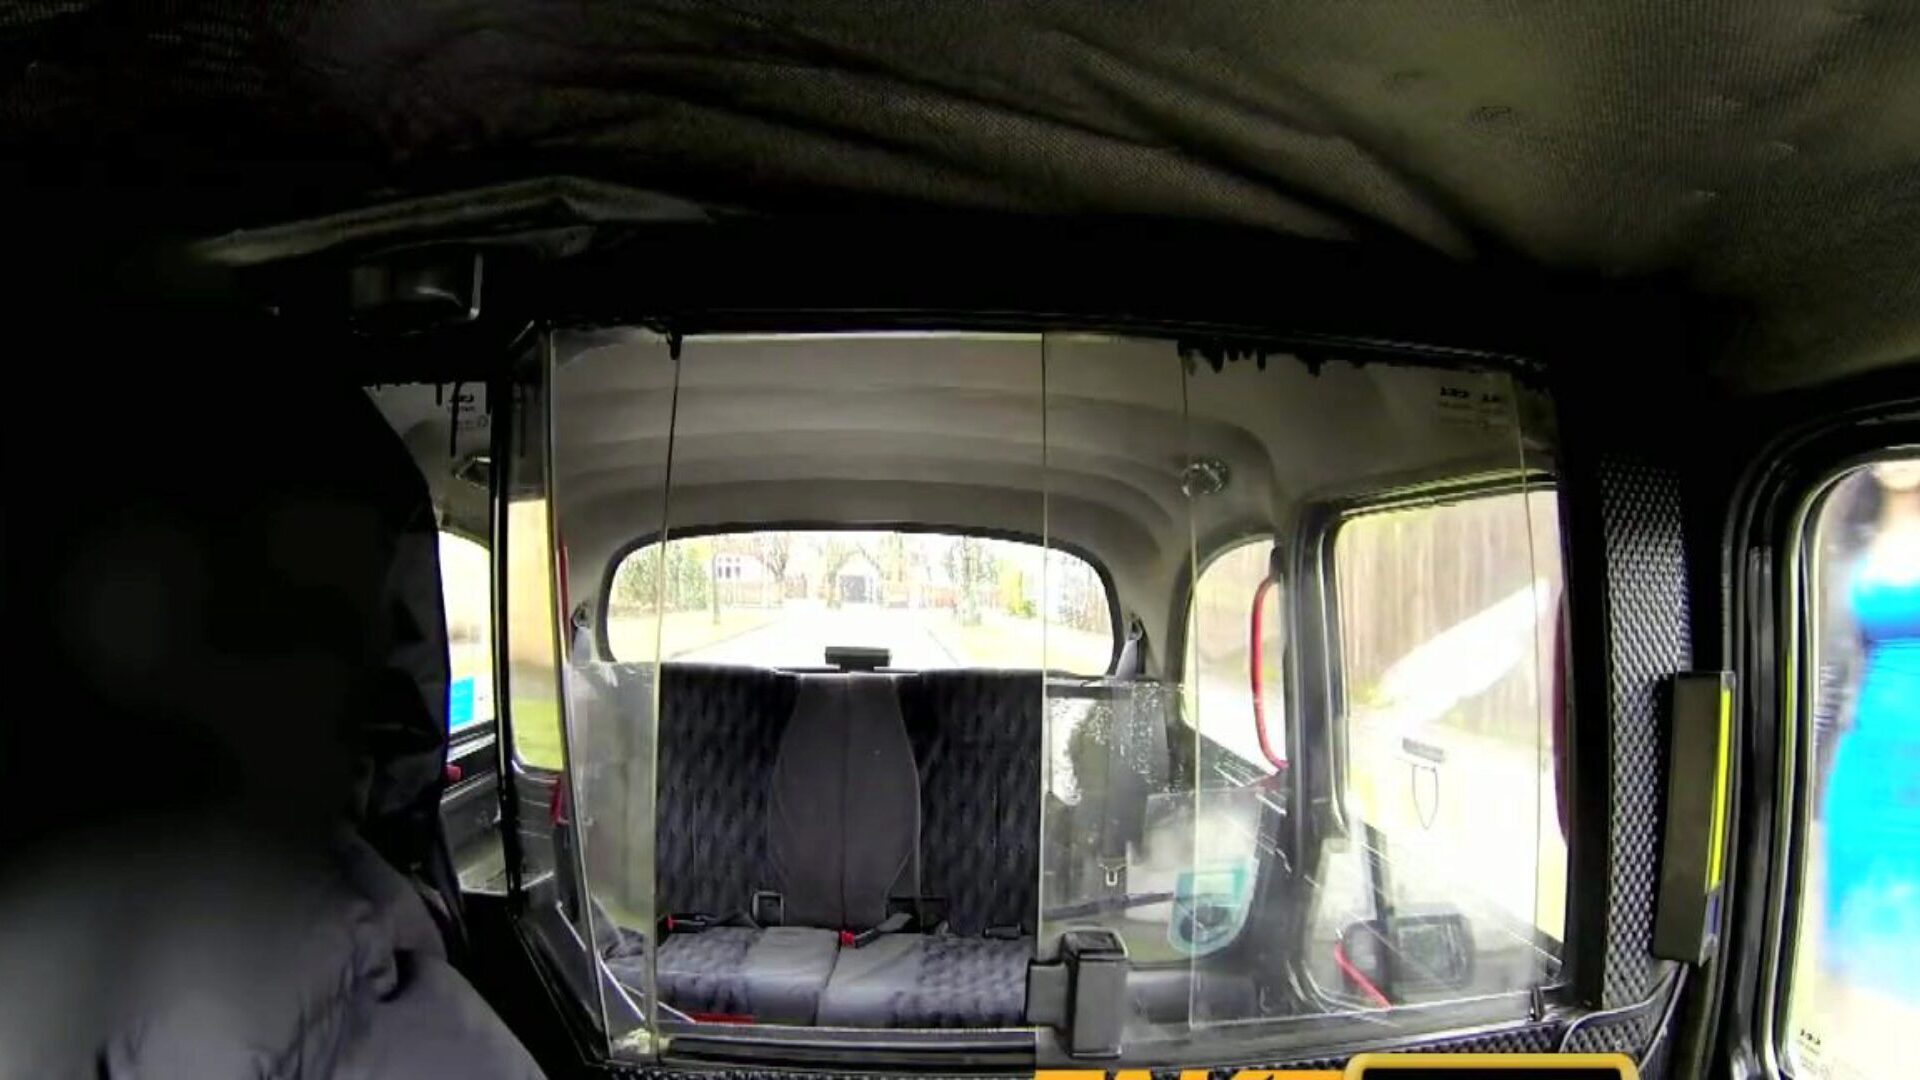 Faketaxi Sex Starved Career Woman in Lunch Break Sex Tape - Free Porn Videos - YouPorn Watch FakeTaxi Sex starved career damsel in lunch break hookup gauze online on YouPorn.com. YouPorn is the largest Amateur porn episode site with the finest selection of free high quality reality episodes Enjoy our HD porno episodes on any contraption of your choosing!